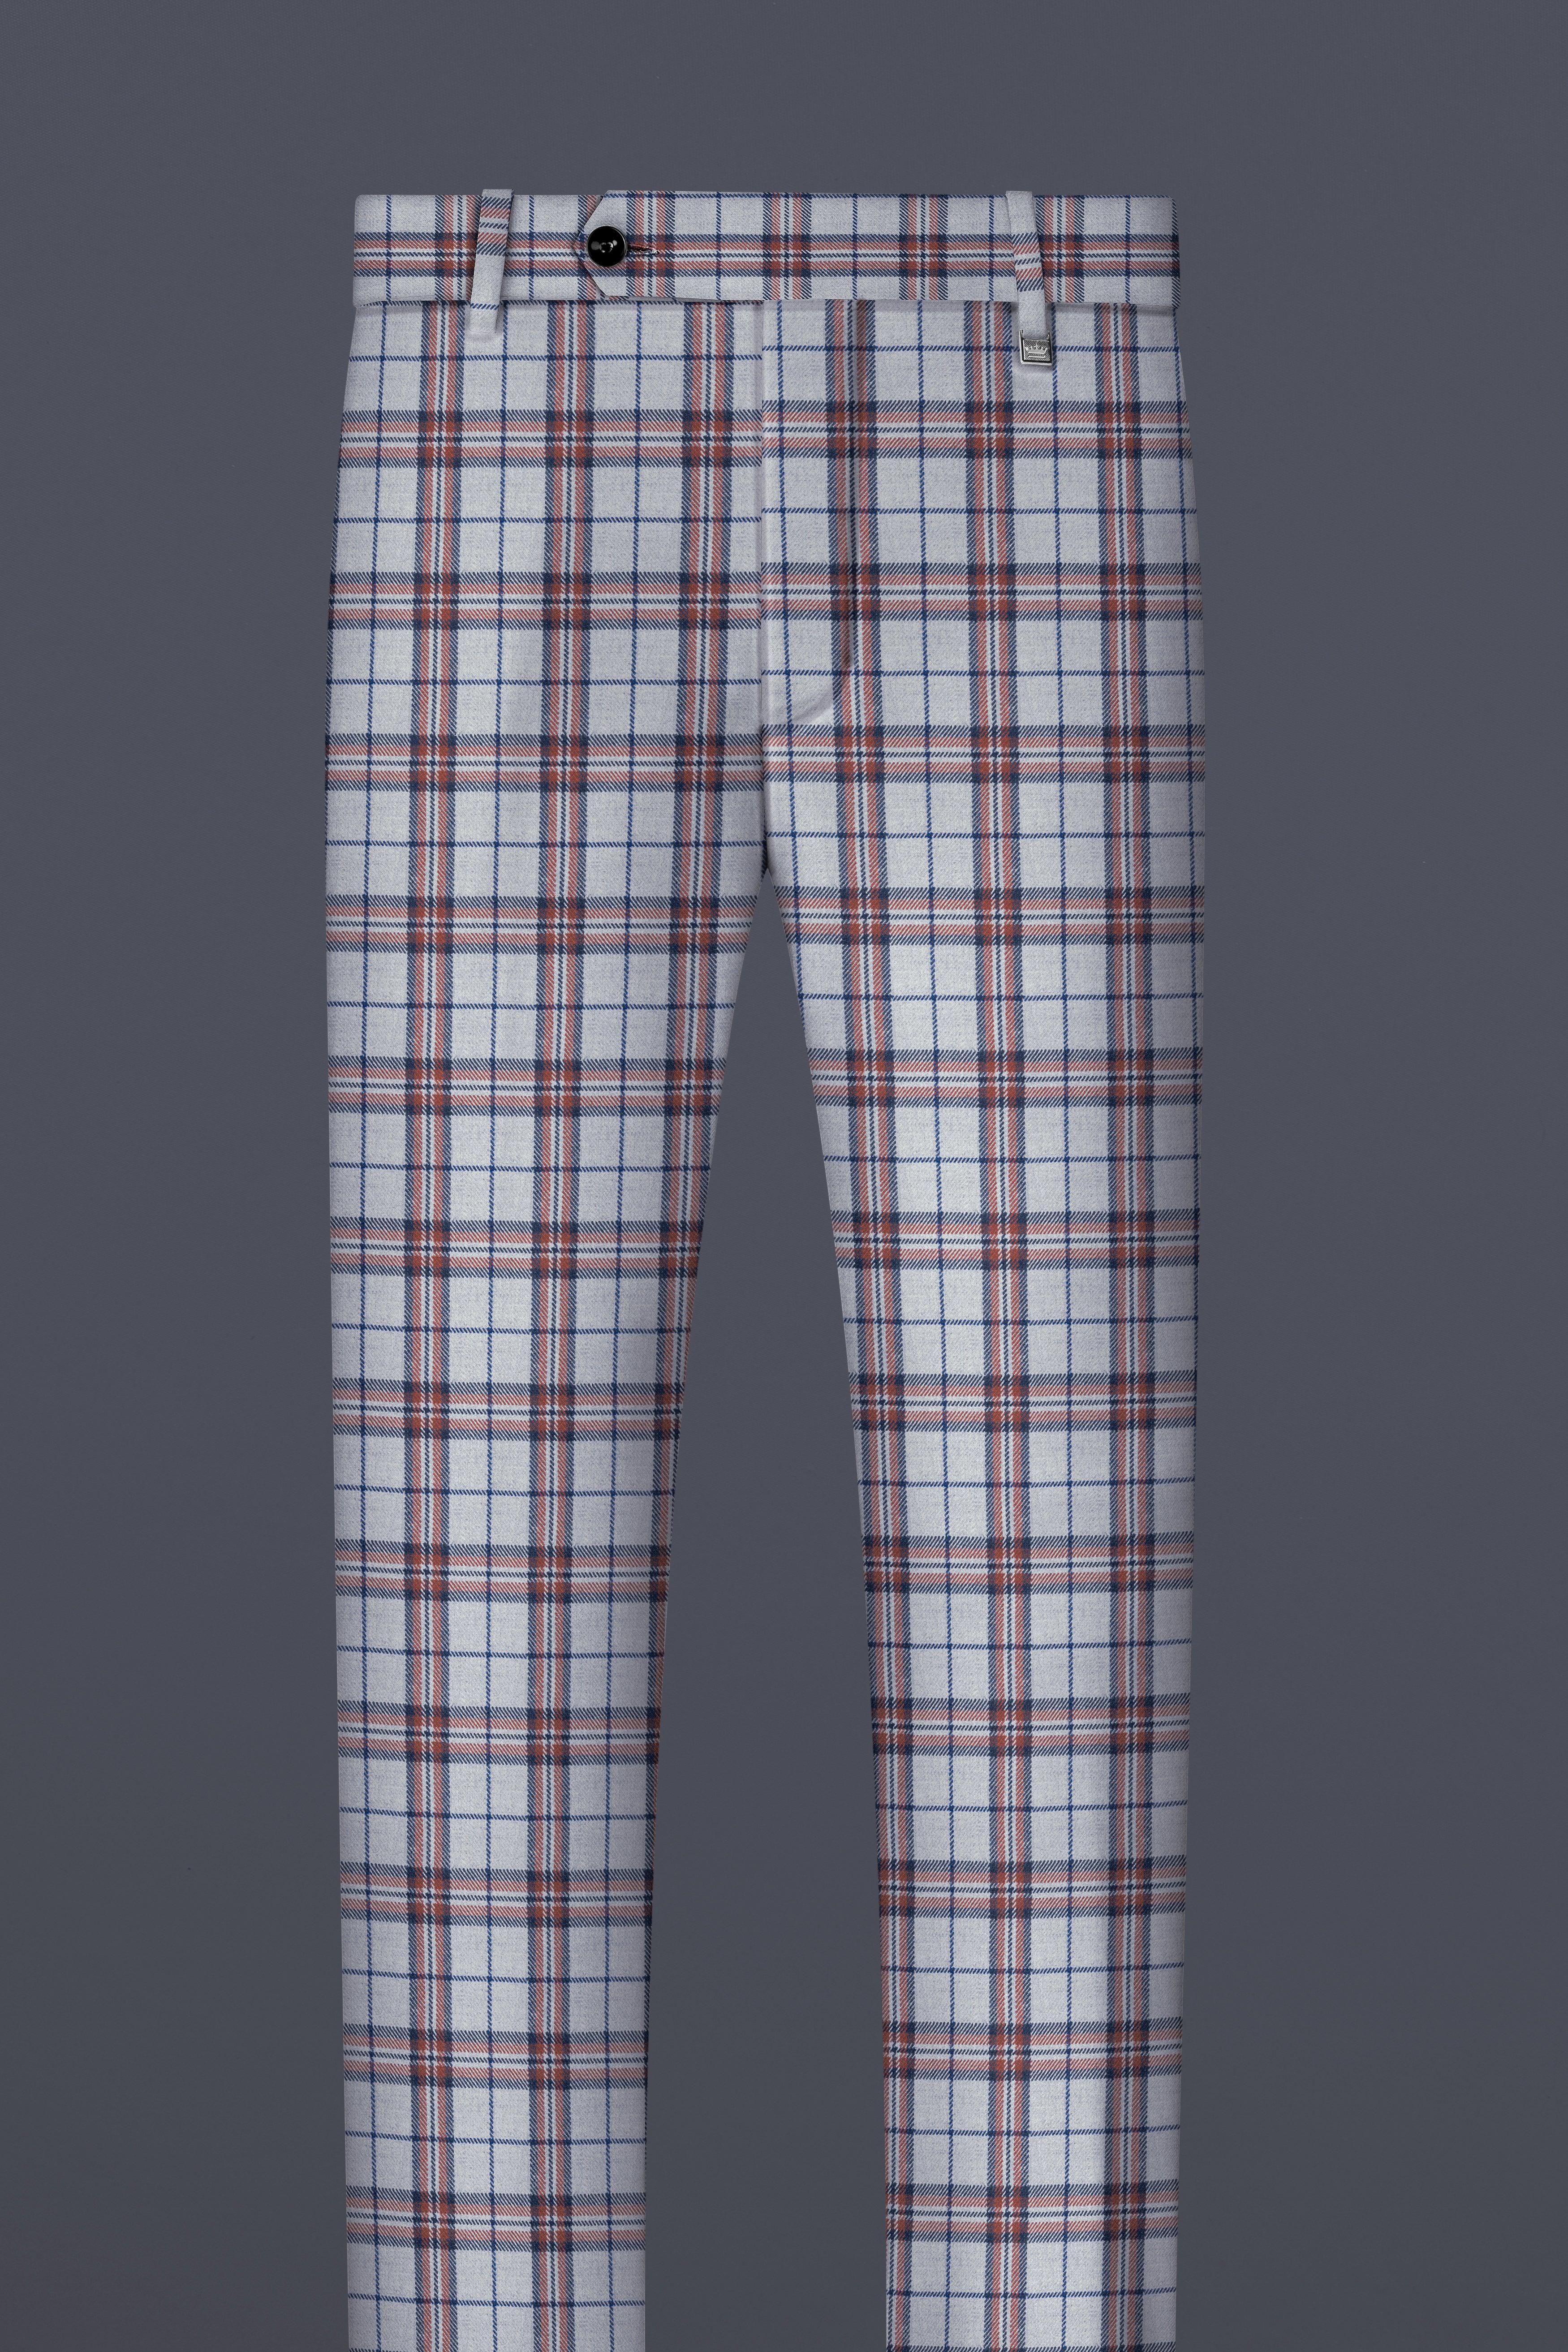 Cadet Gray with Maroon and Blue Plaid Tweed Pant